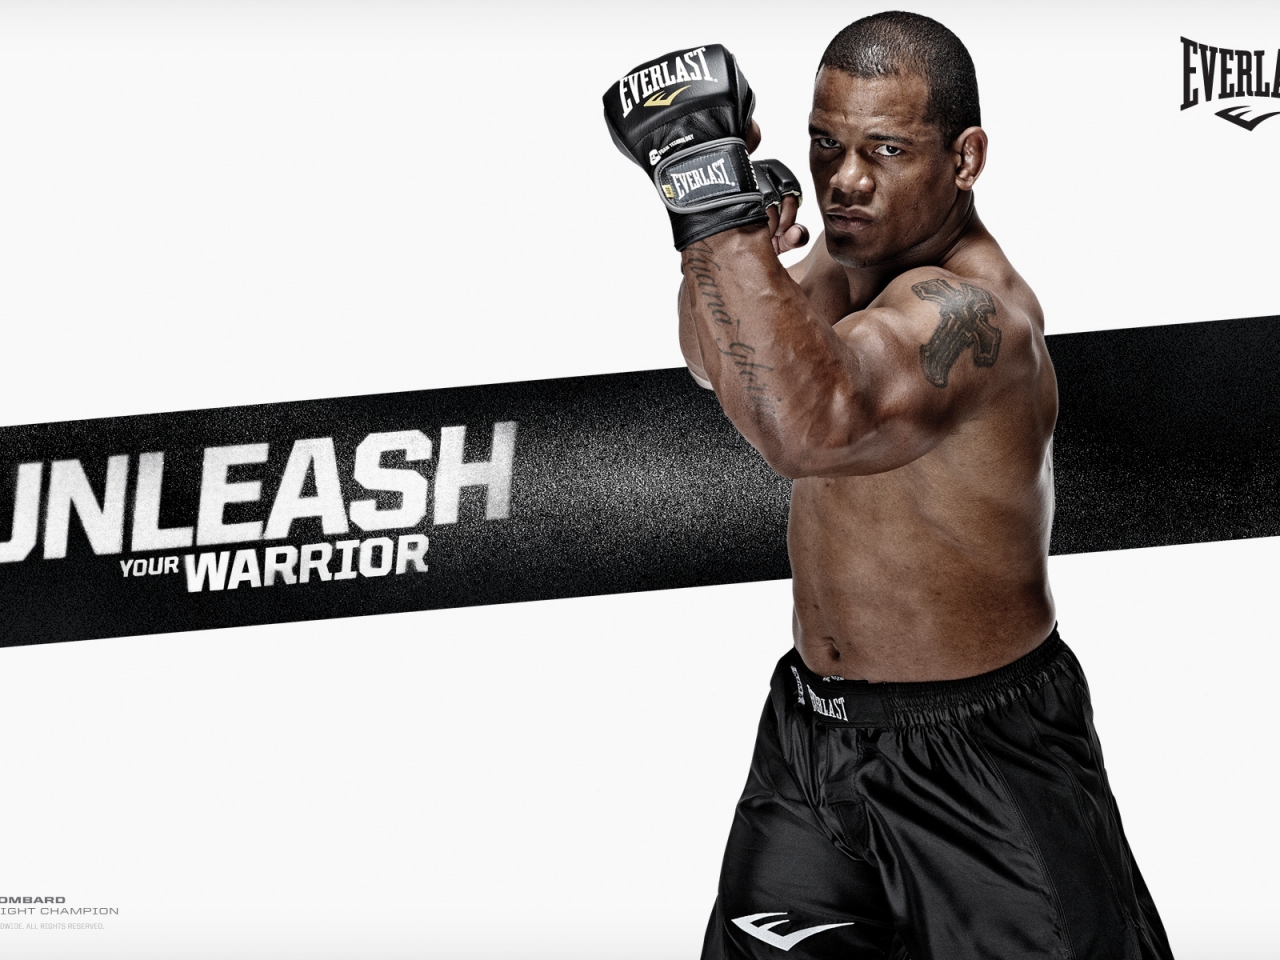 Hector Lombard for 1280 x 960 resolution